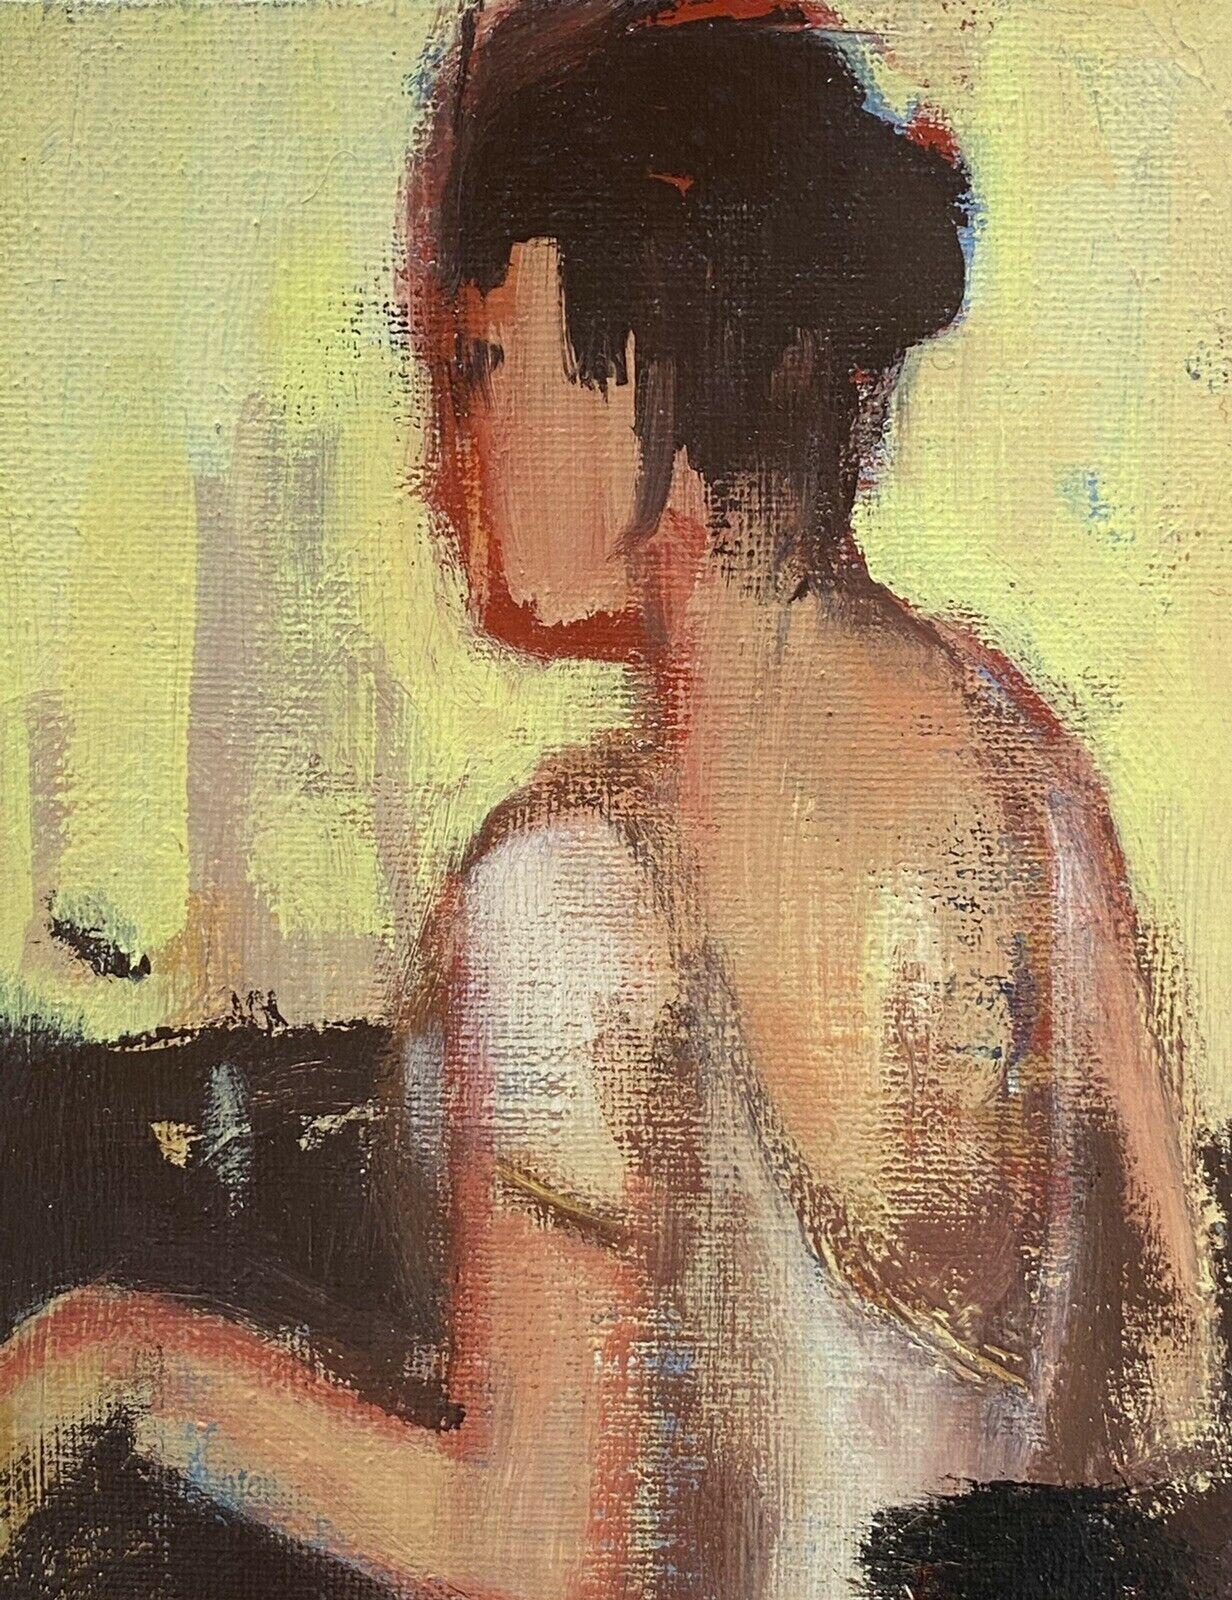 Artist/ School: Rene Leroy (French b. 1932)

Title: Figurative sketch of figure

Medium: oil painting on canvas

Size: painting: 7 x 5.5 inches

Provenance: all the paintings we have for sale by this artist, came the artists studio in